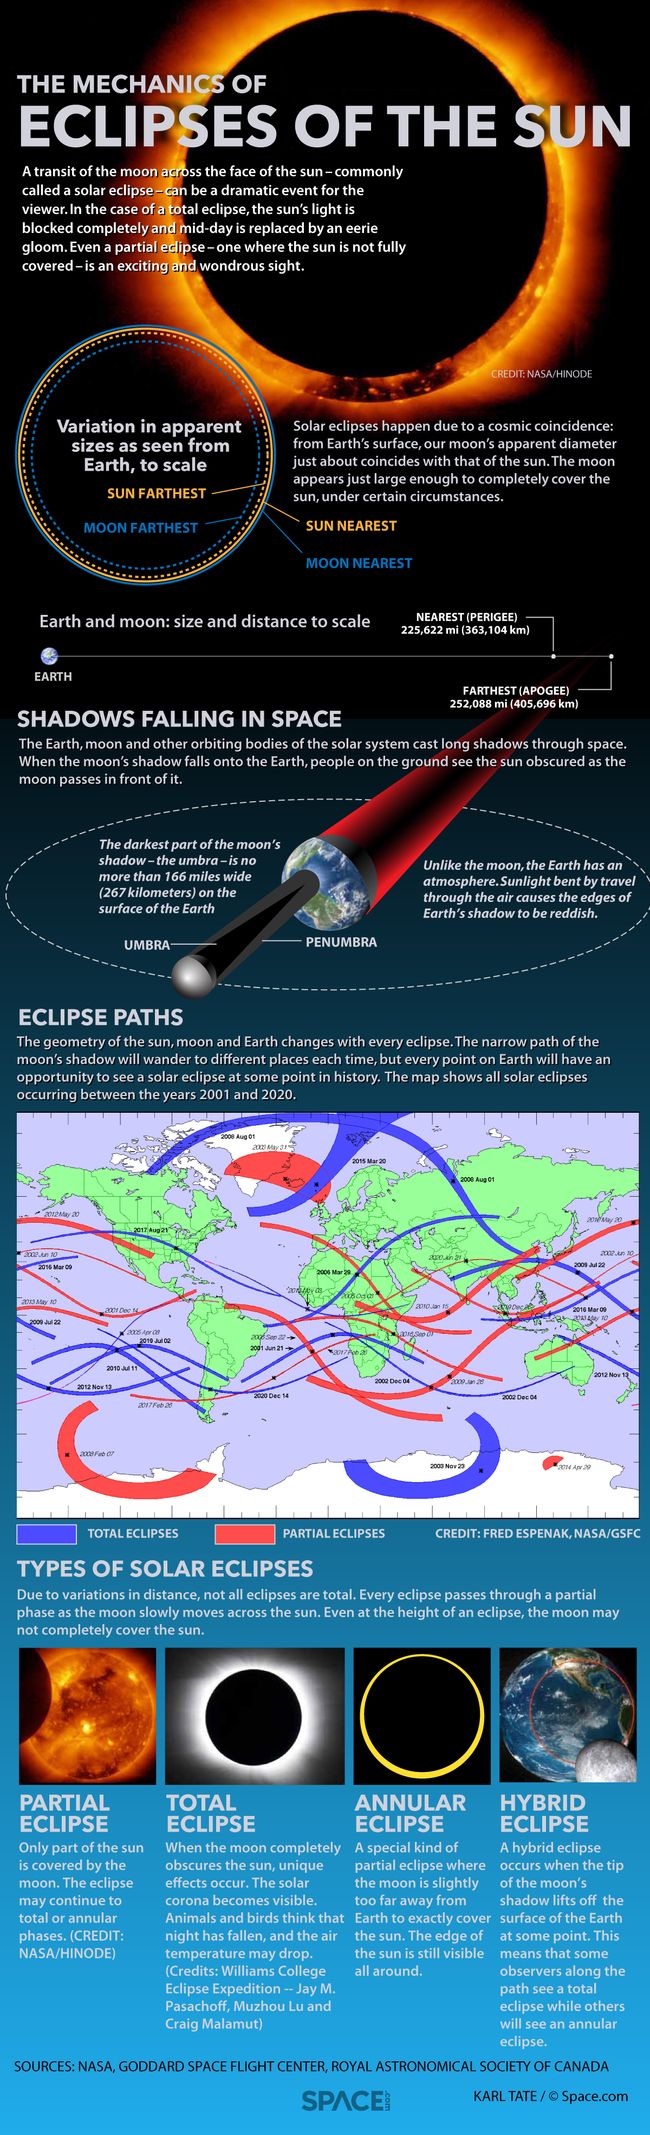 Total Eclipse Frequency Unveiled: A Must-Read For Astronomy Enthusiasts